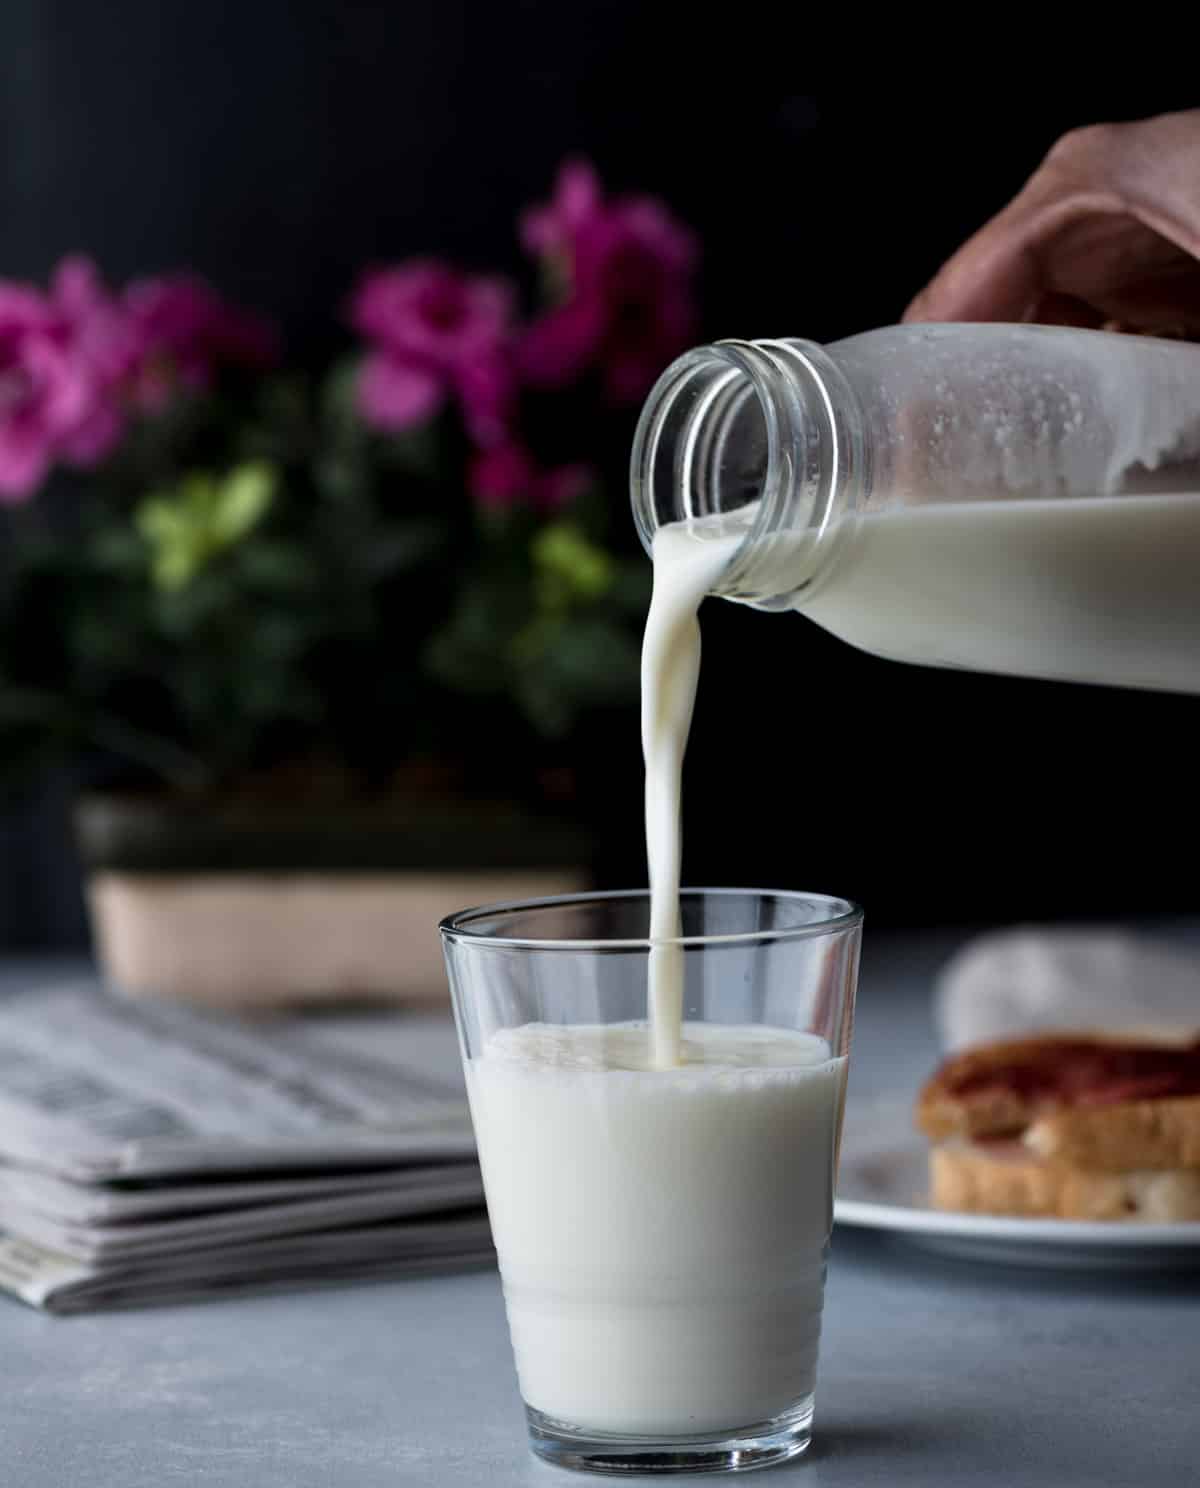 A hand pouring milk from a bottle into a glass